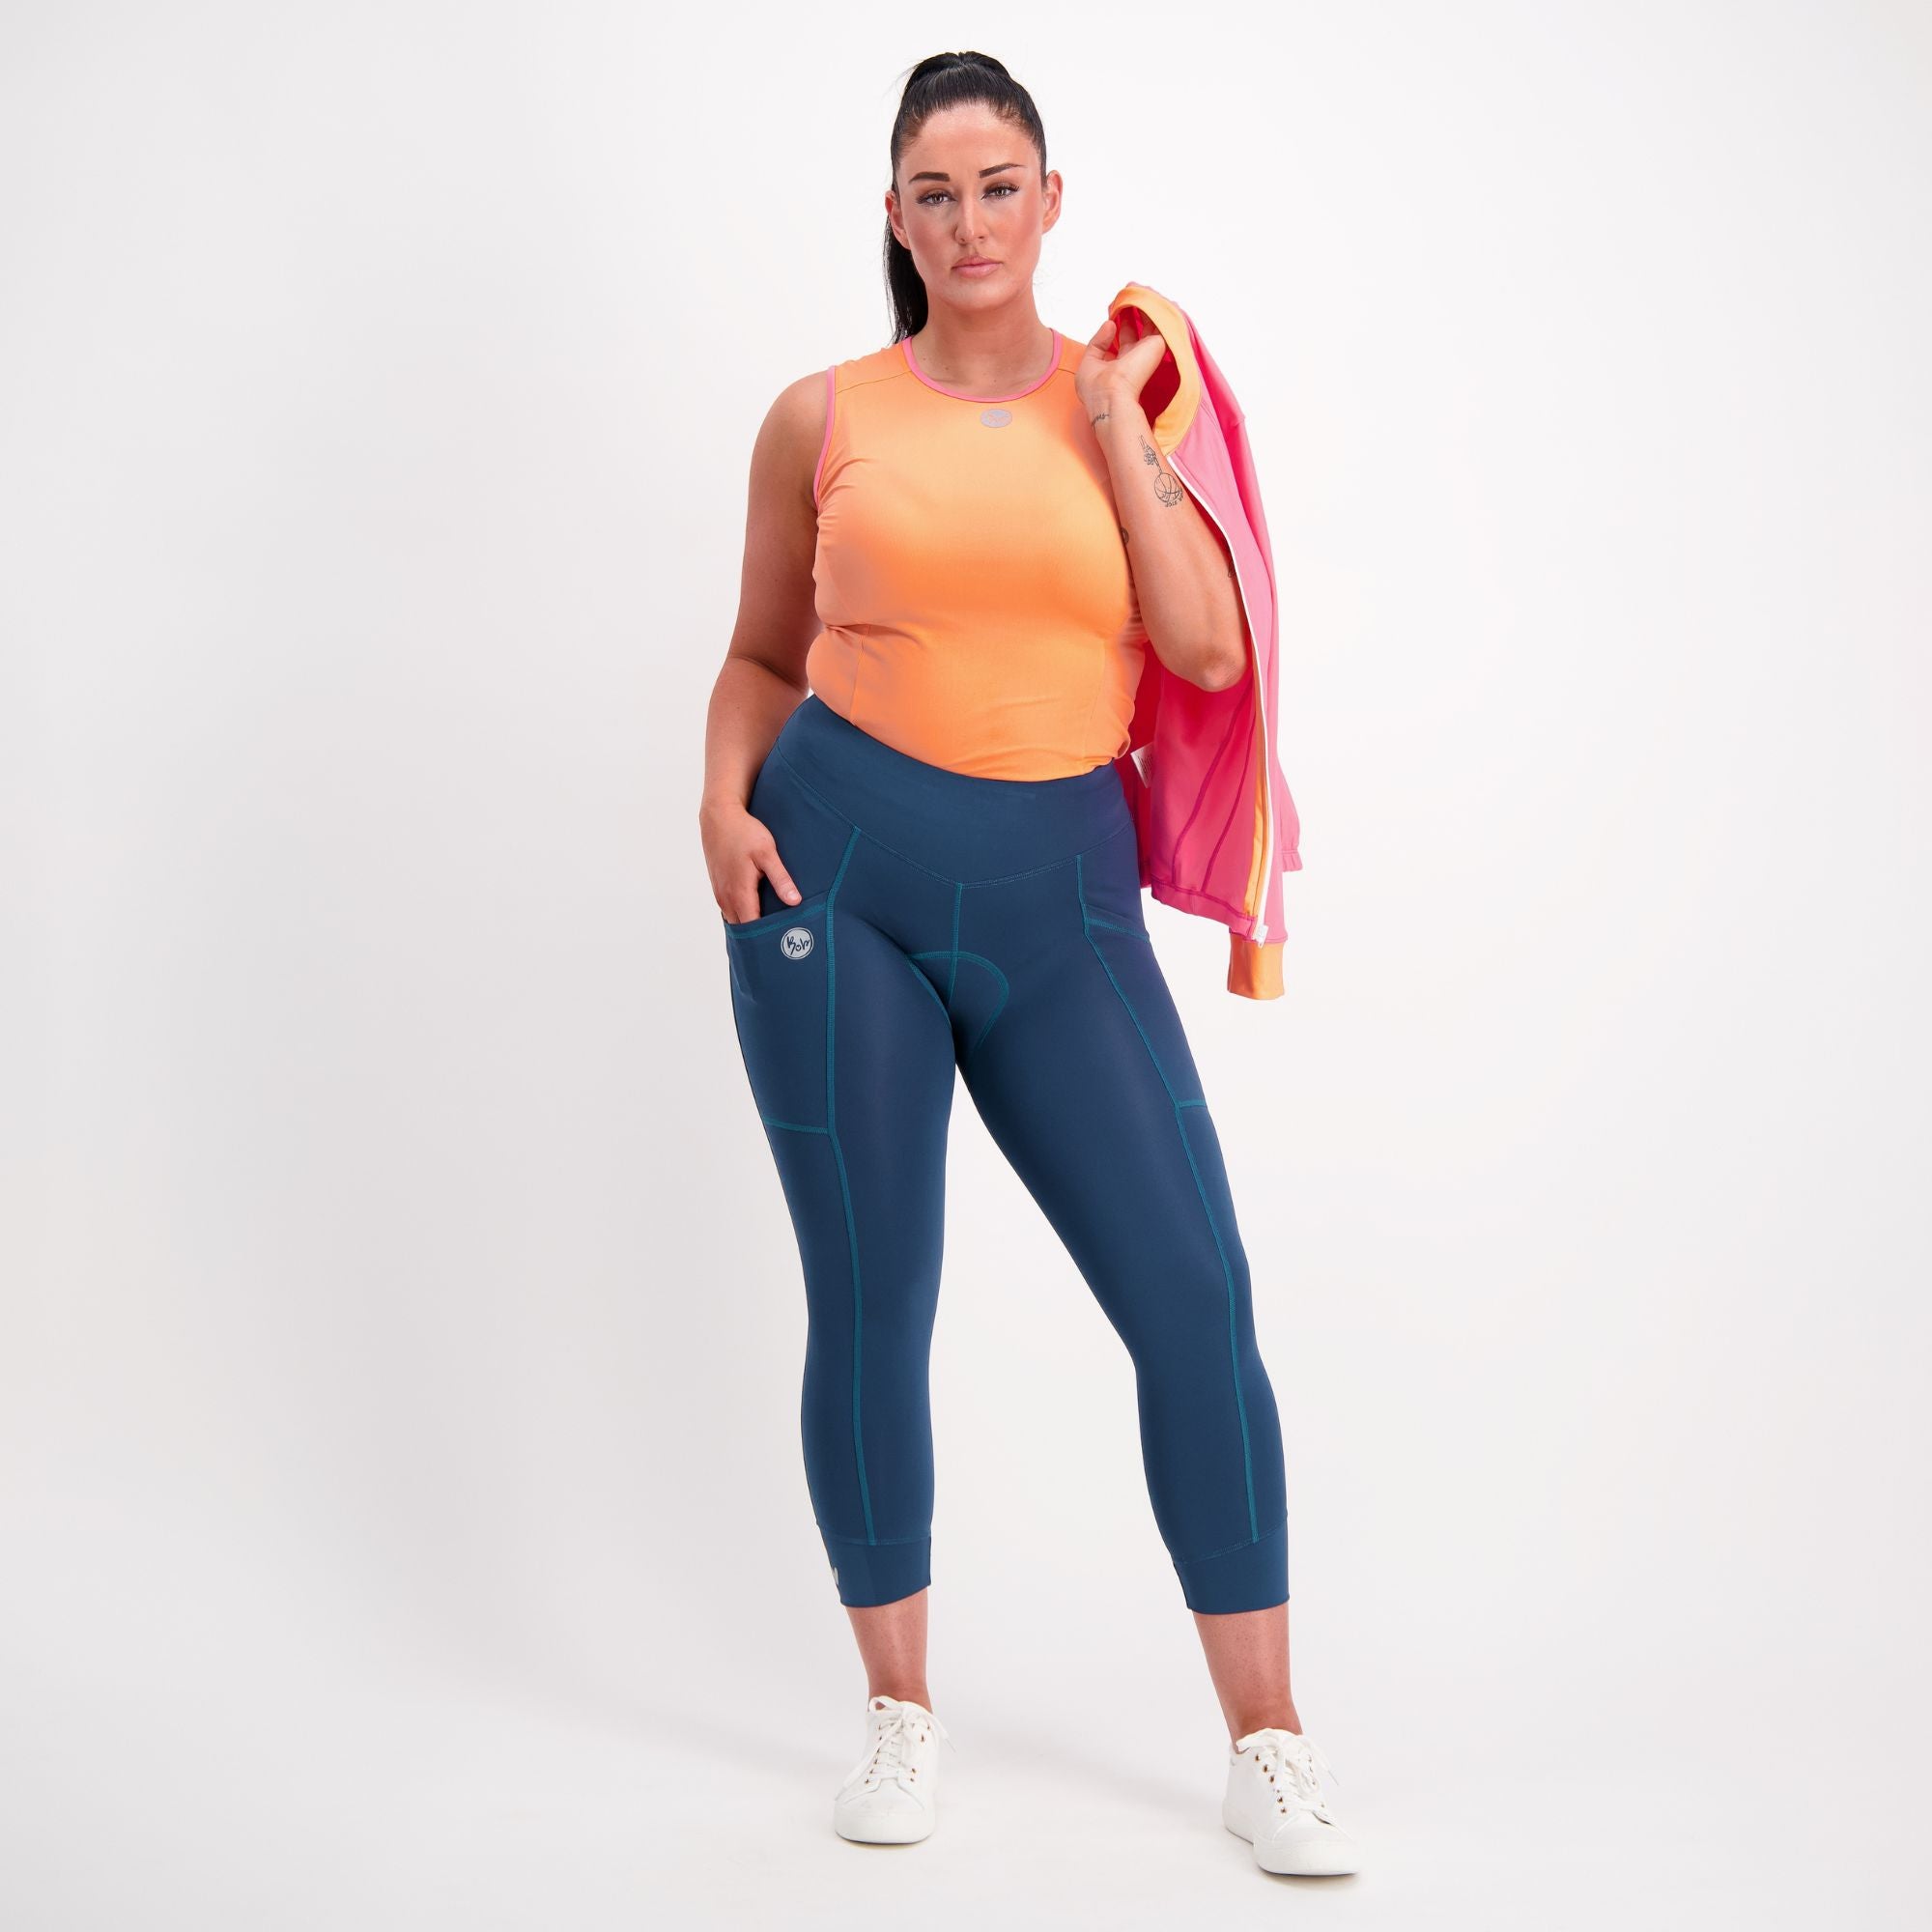 Full body view of Orange with pink trim sleeveless Cycling Base Layer on female model